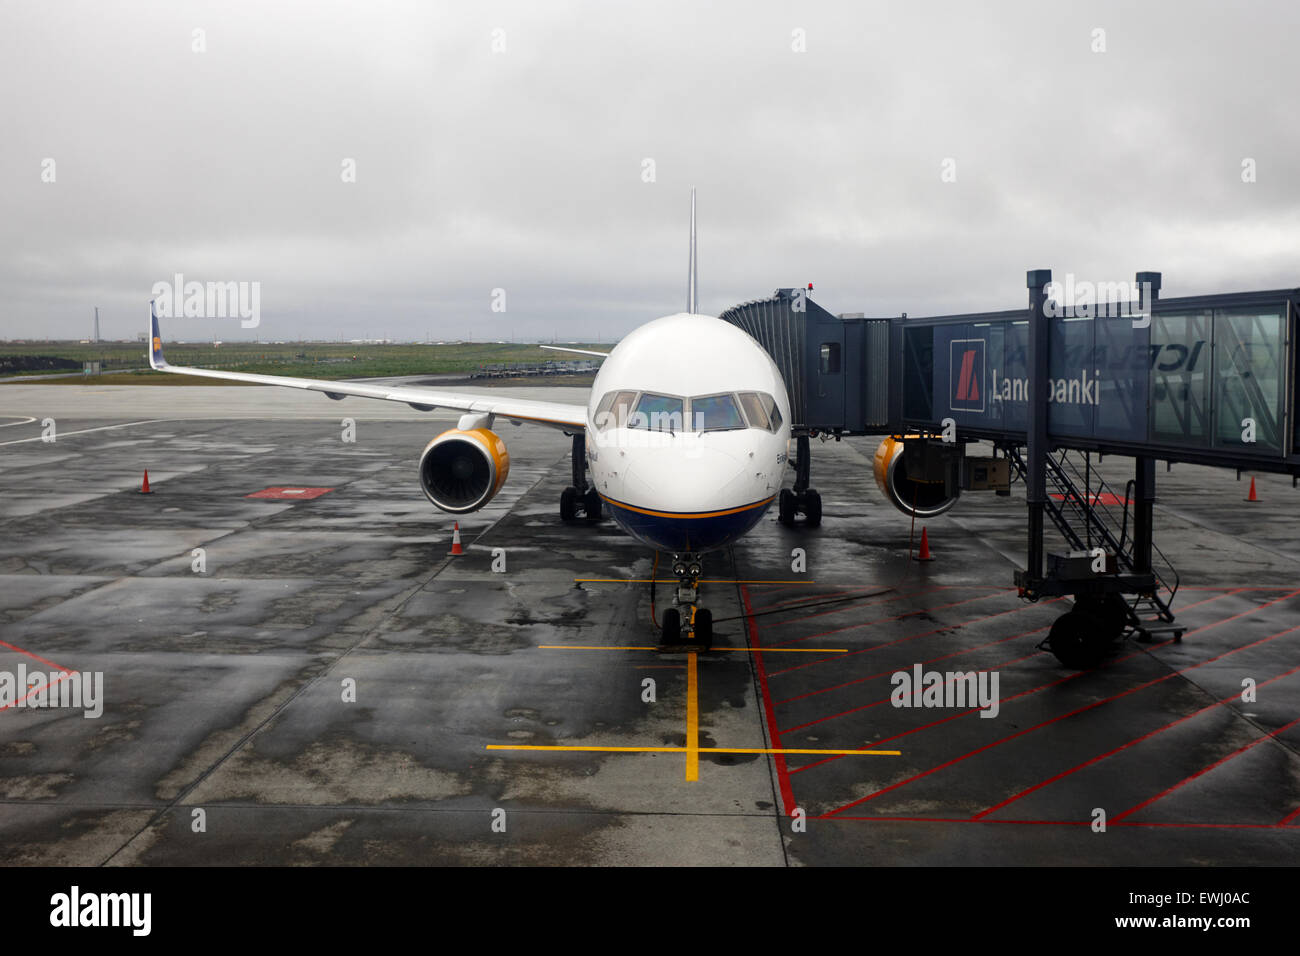 icelandair aircraft on stand at departures gate Keflavik airport Iceland Stock Photo